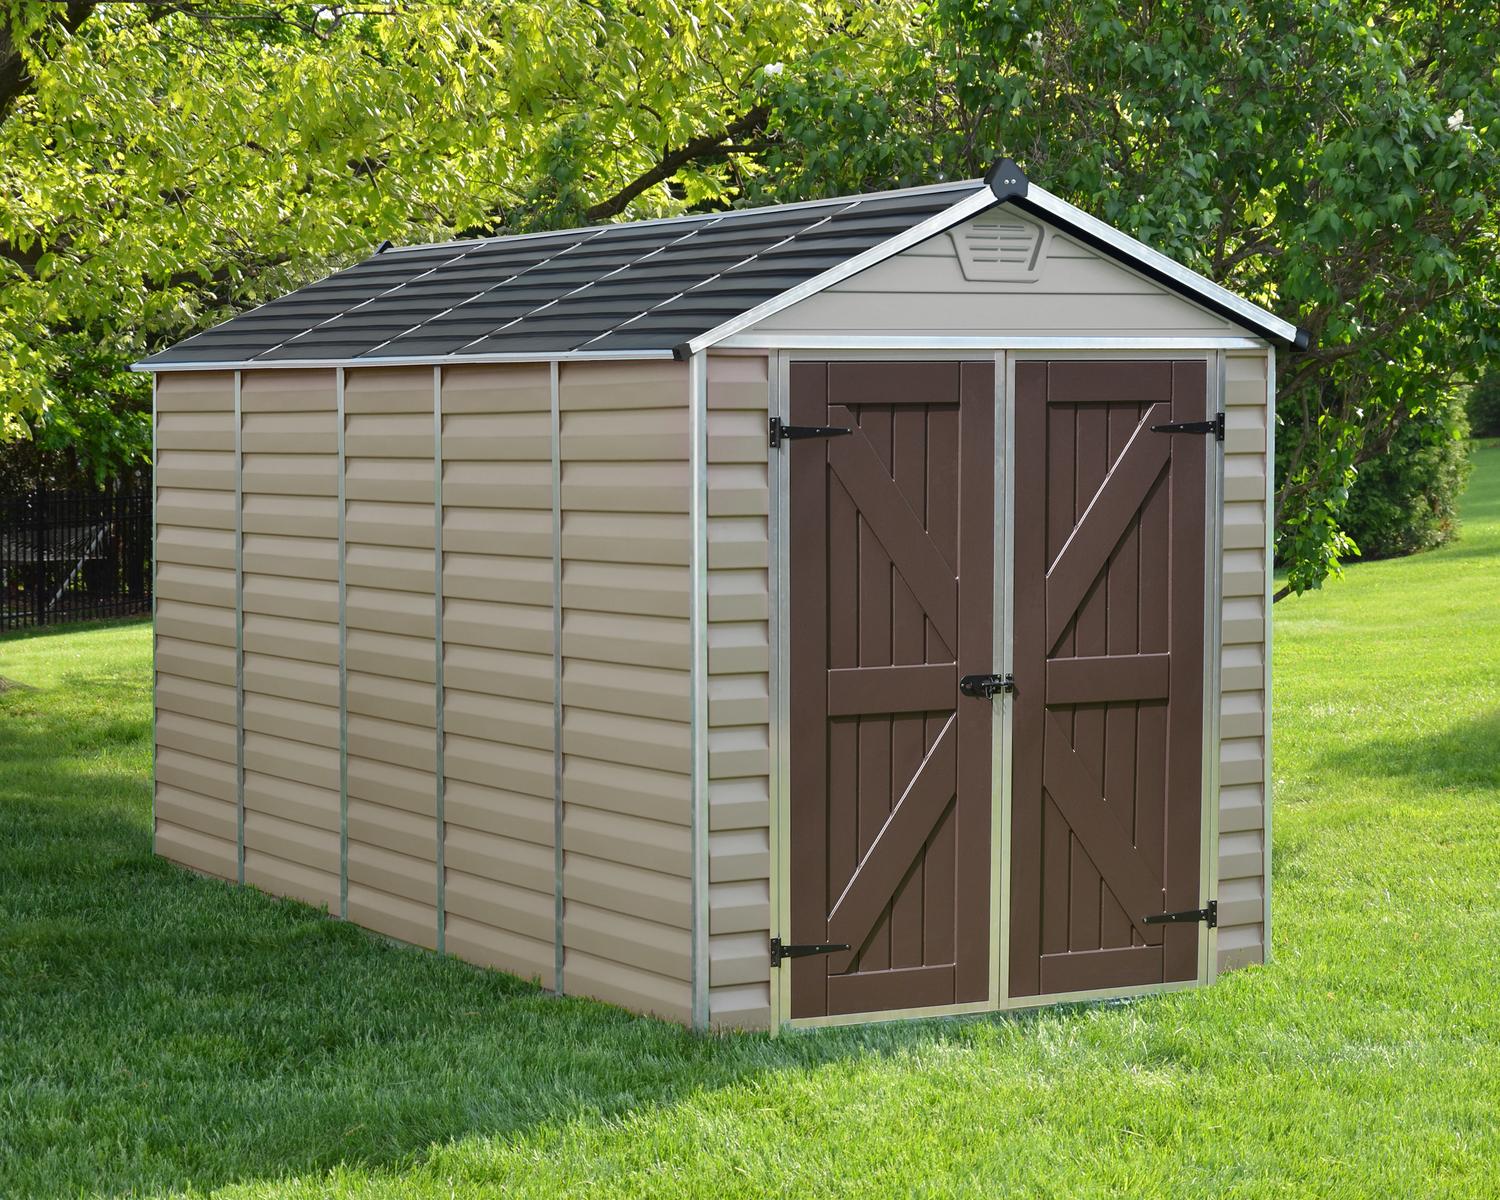 Skylight 6 ft. x 12 ft. Large Garden Storage Shed Plastic with Tan Polycarbonate Walls & Aluminium Frame